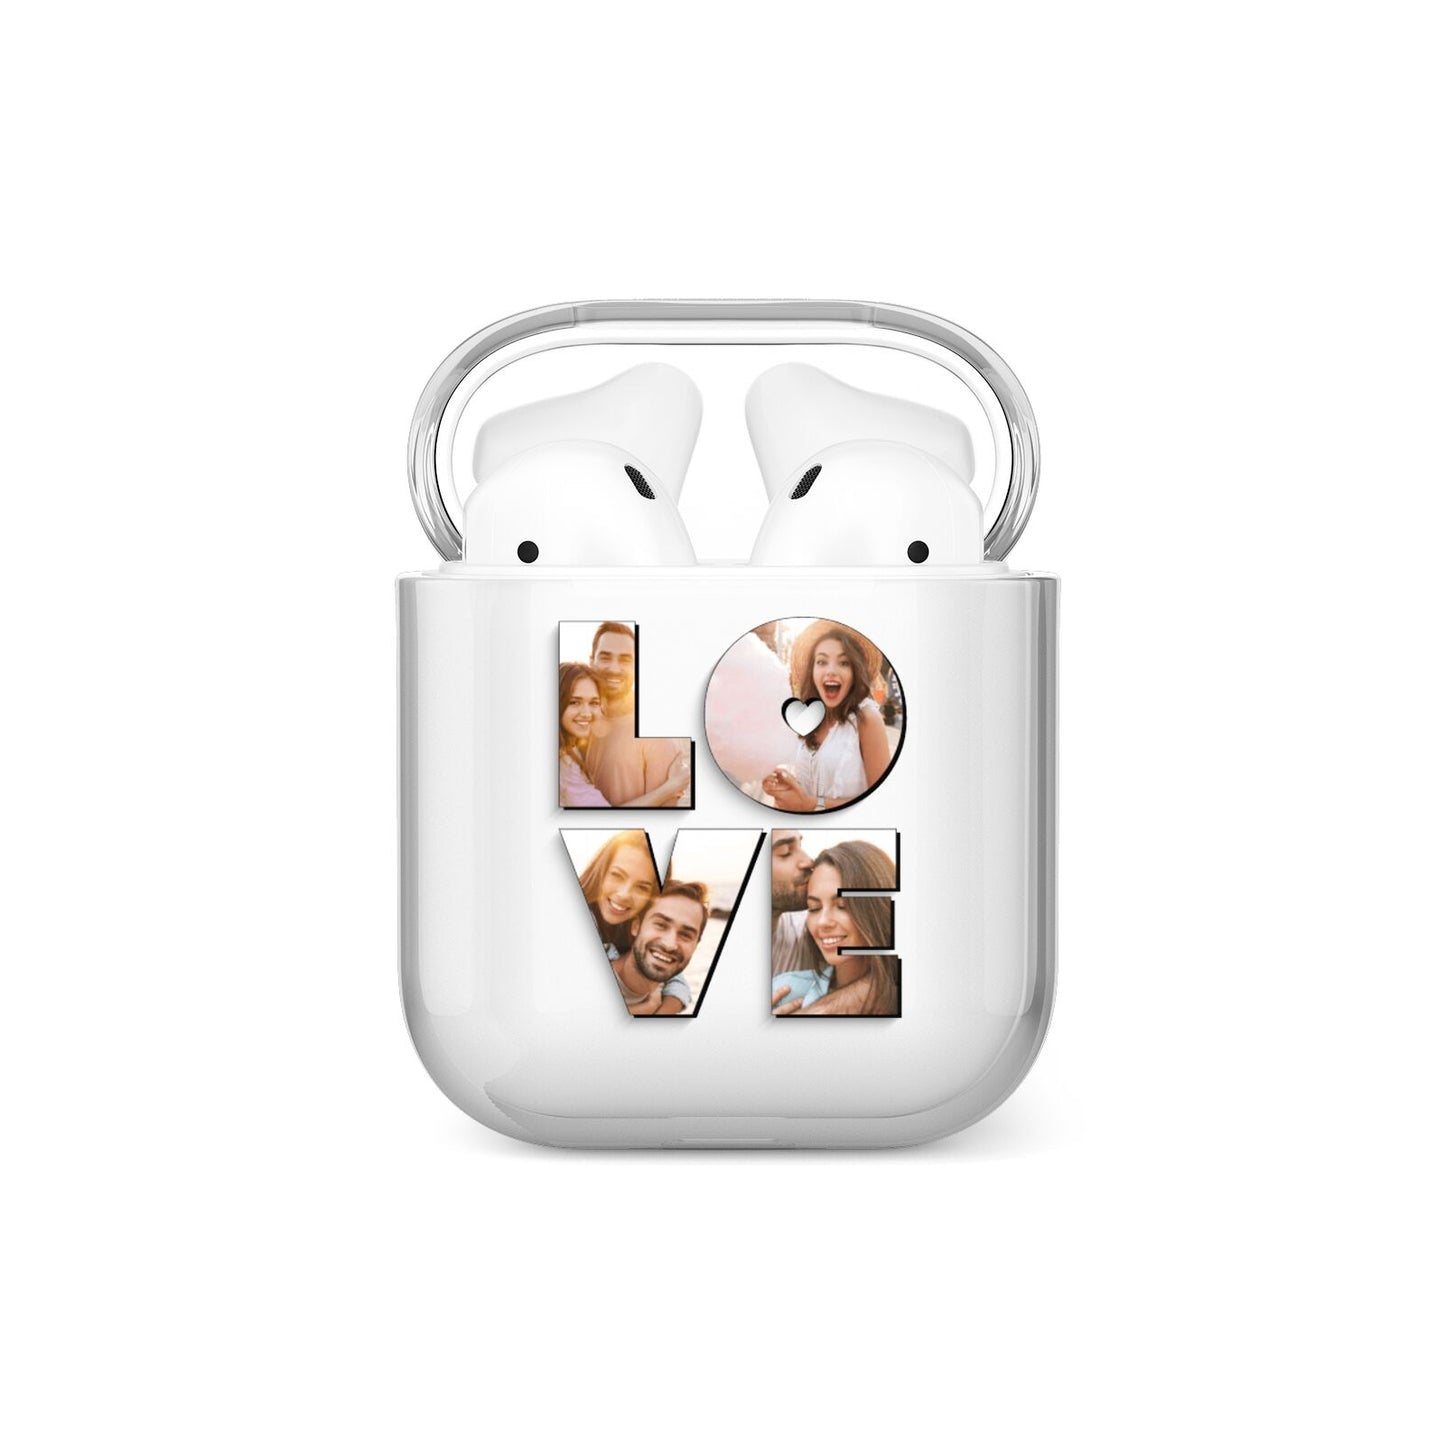 Love Personalised Photo Upload AirPods Case